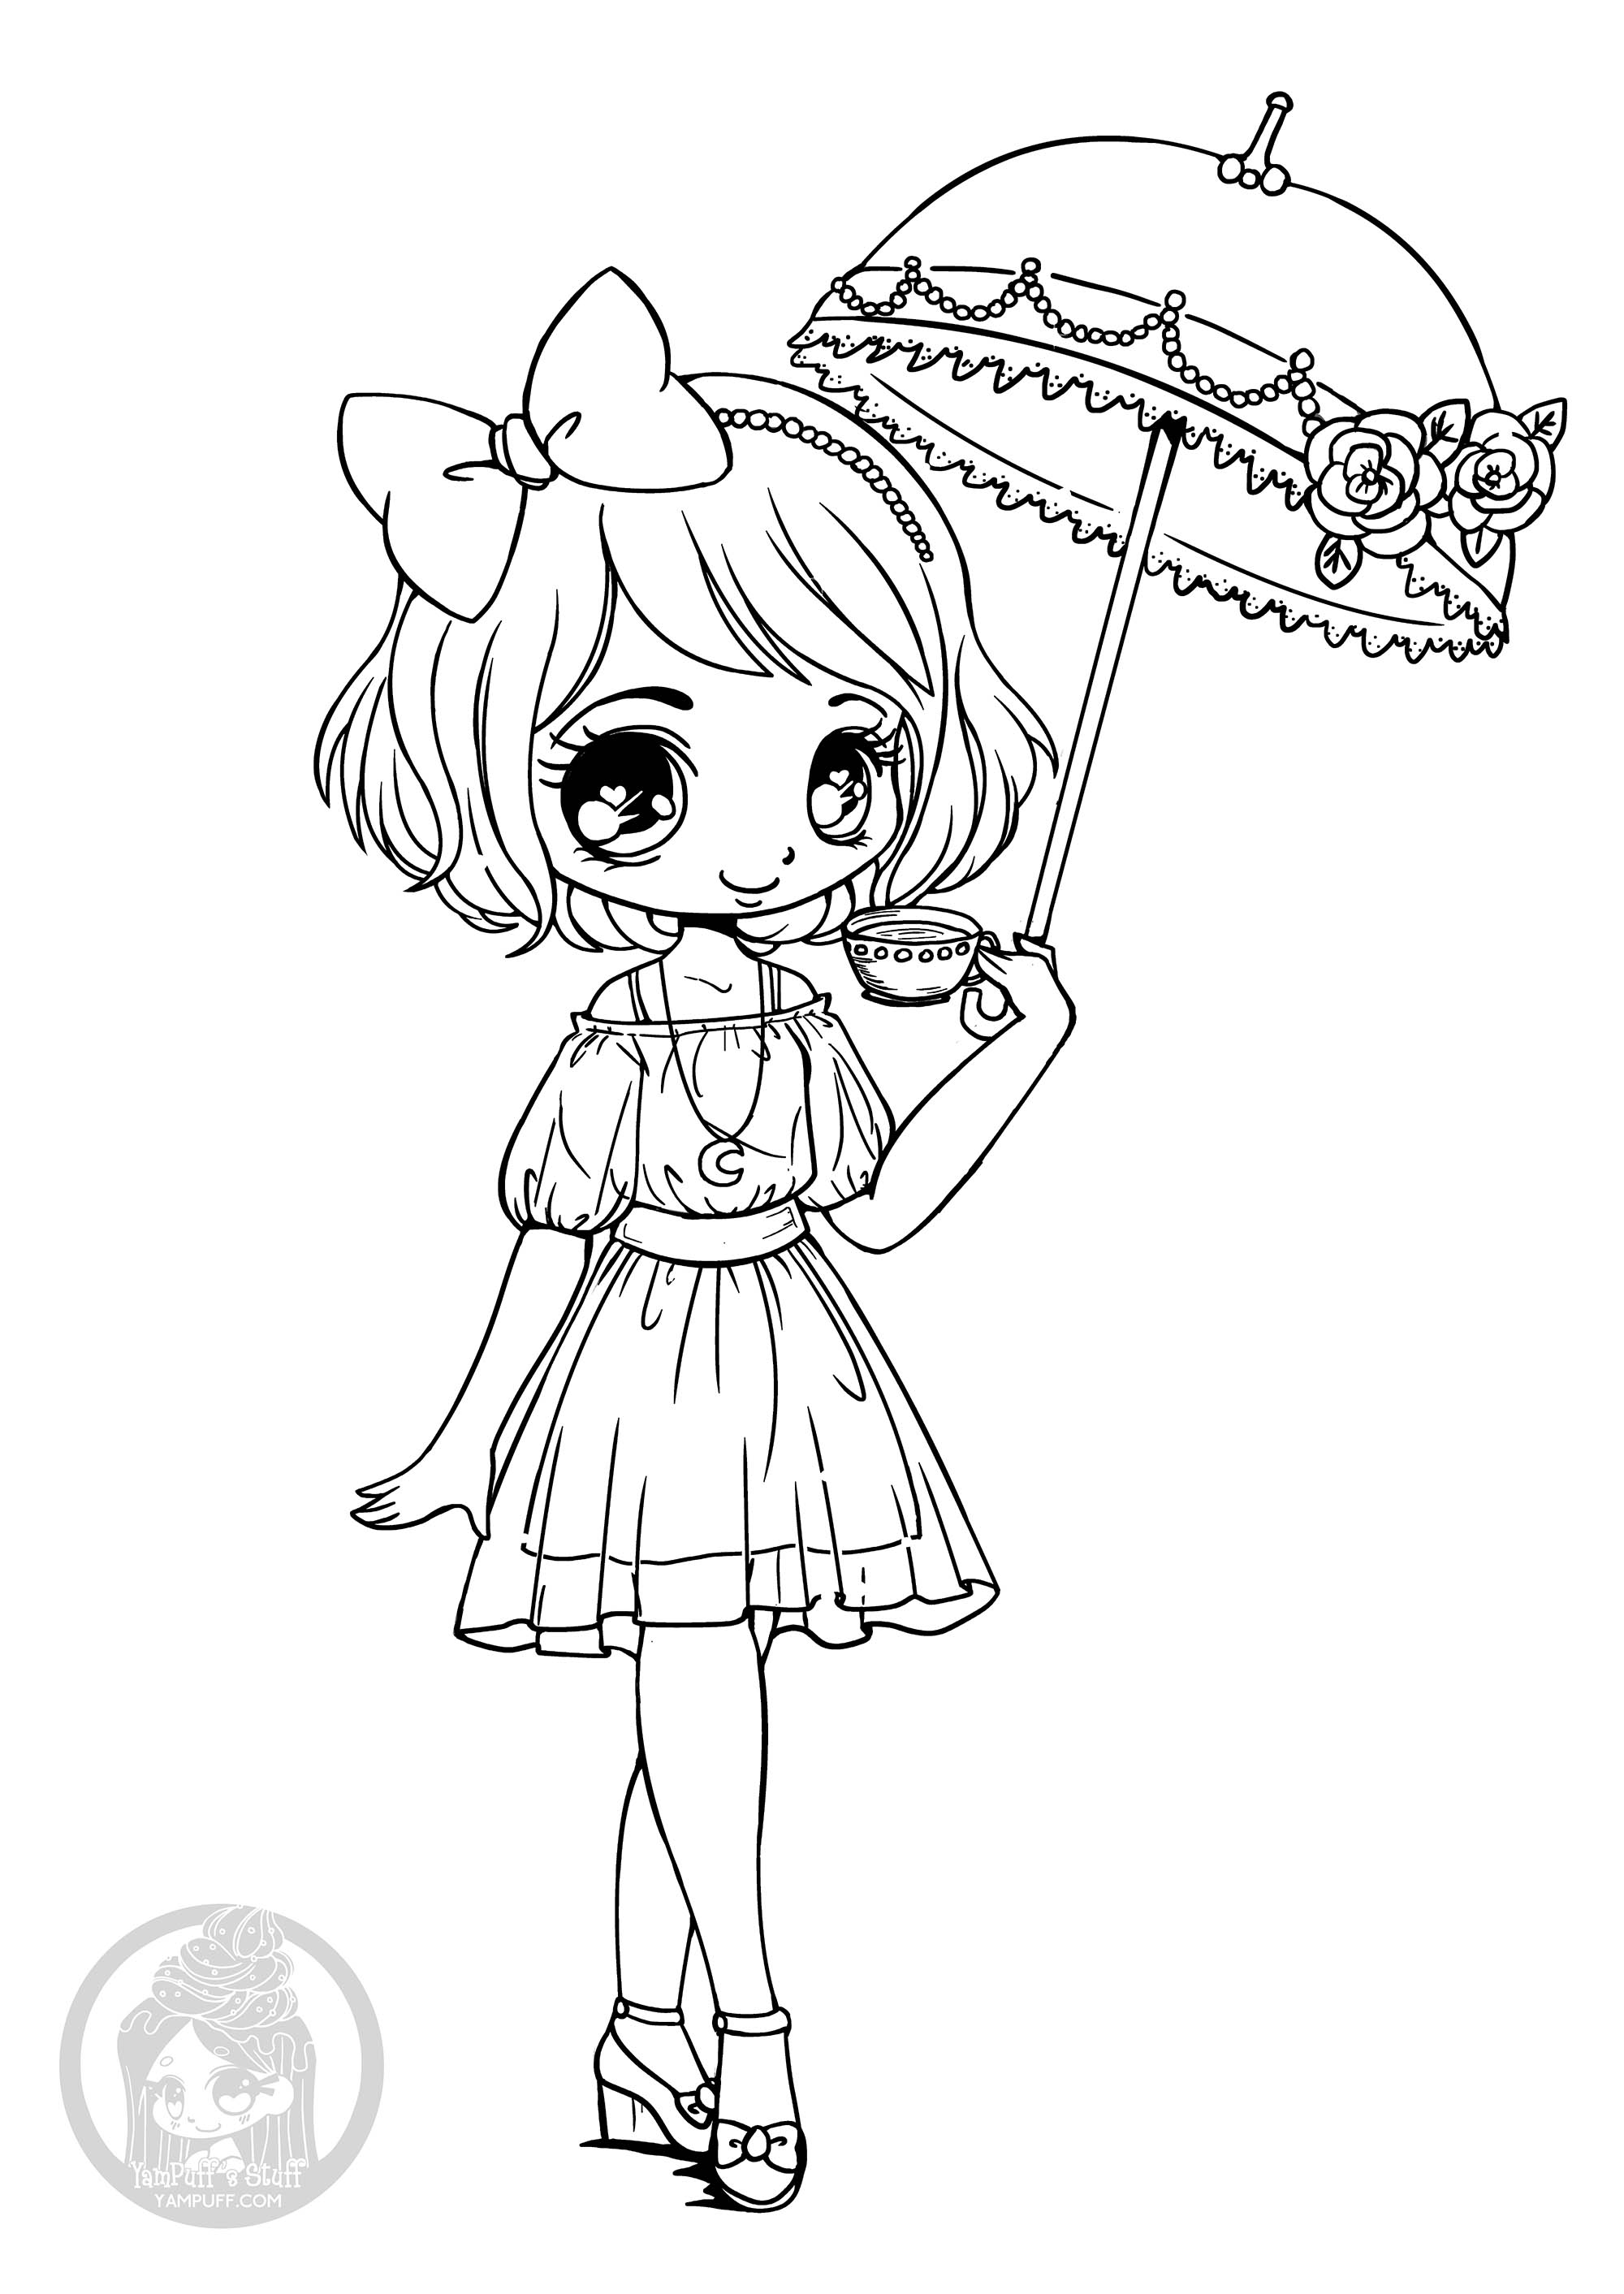 Rainy day ? Come under her umbrella to color this beautiful lady!, Artist : Yampuff